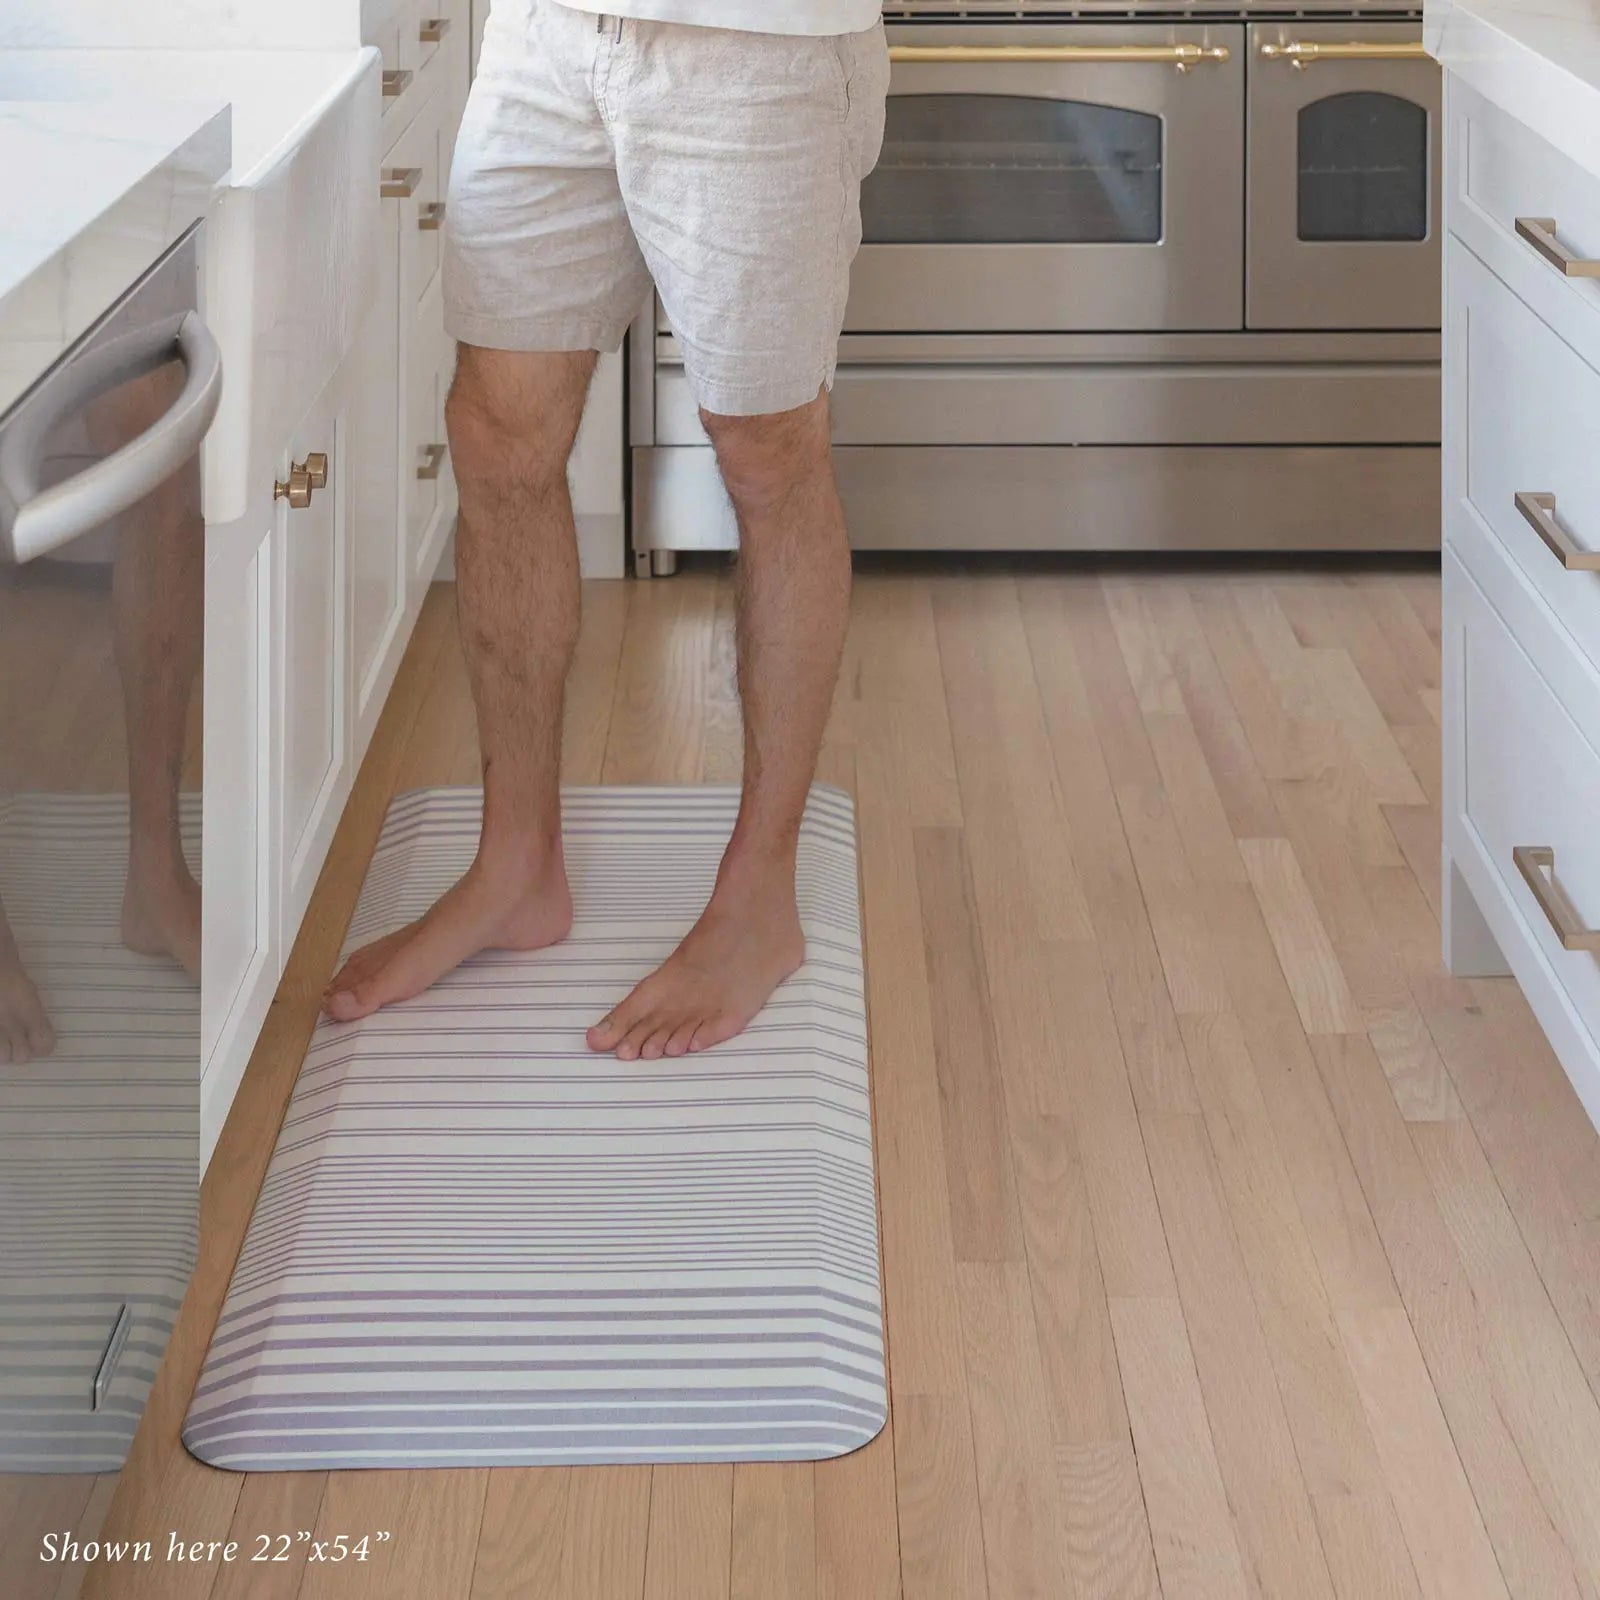 Nantucket Coastal Minimal Blue Ivory Stripe Standing Mat shown with man standing at the kitchen counter on the mat in size 22x54